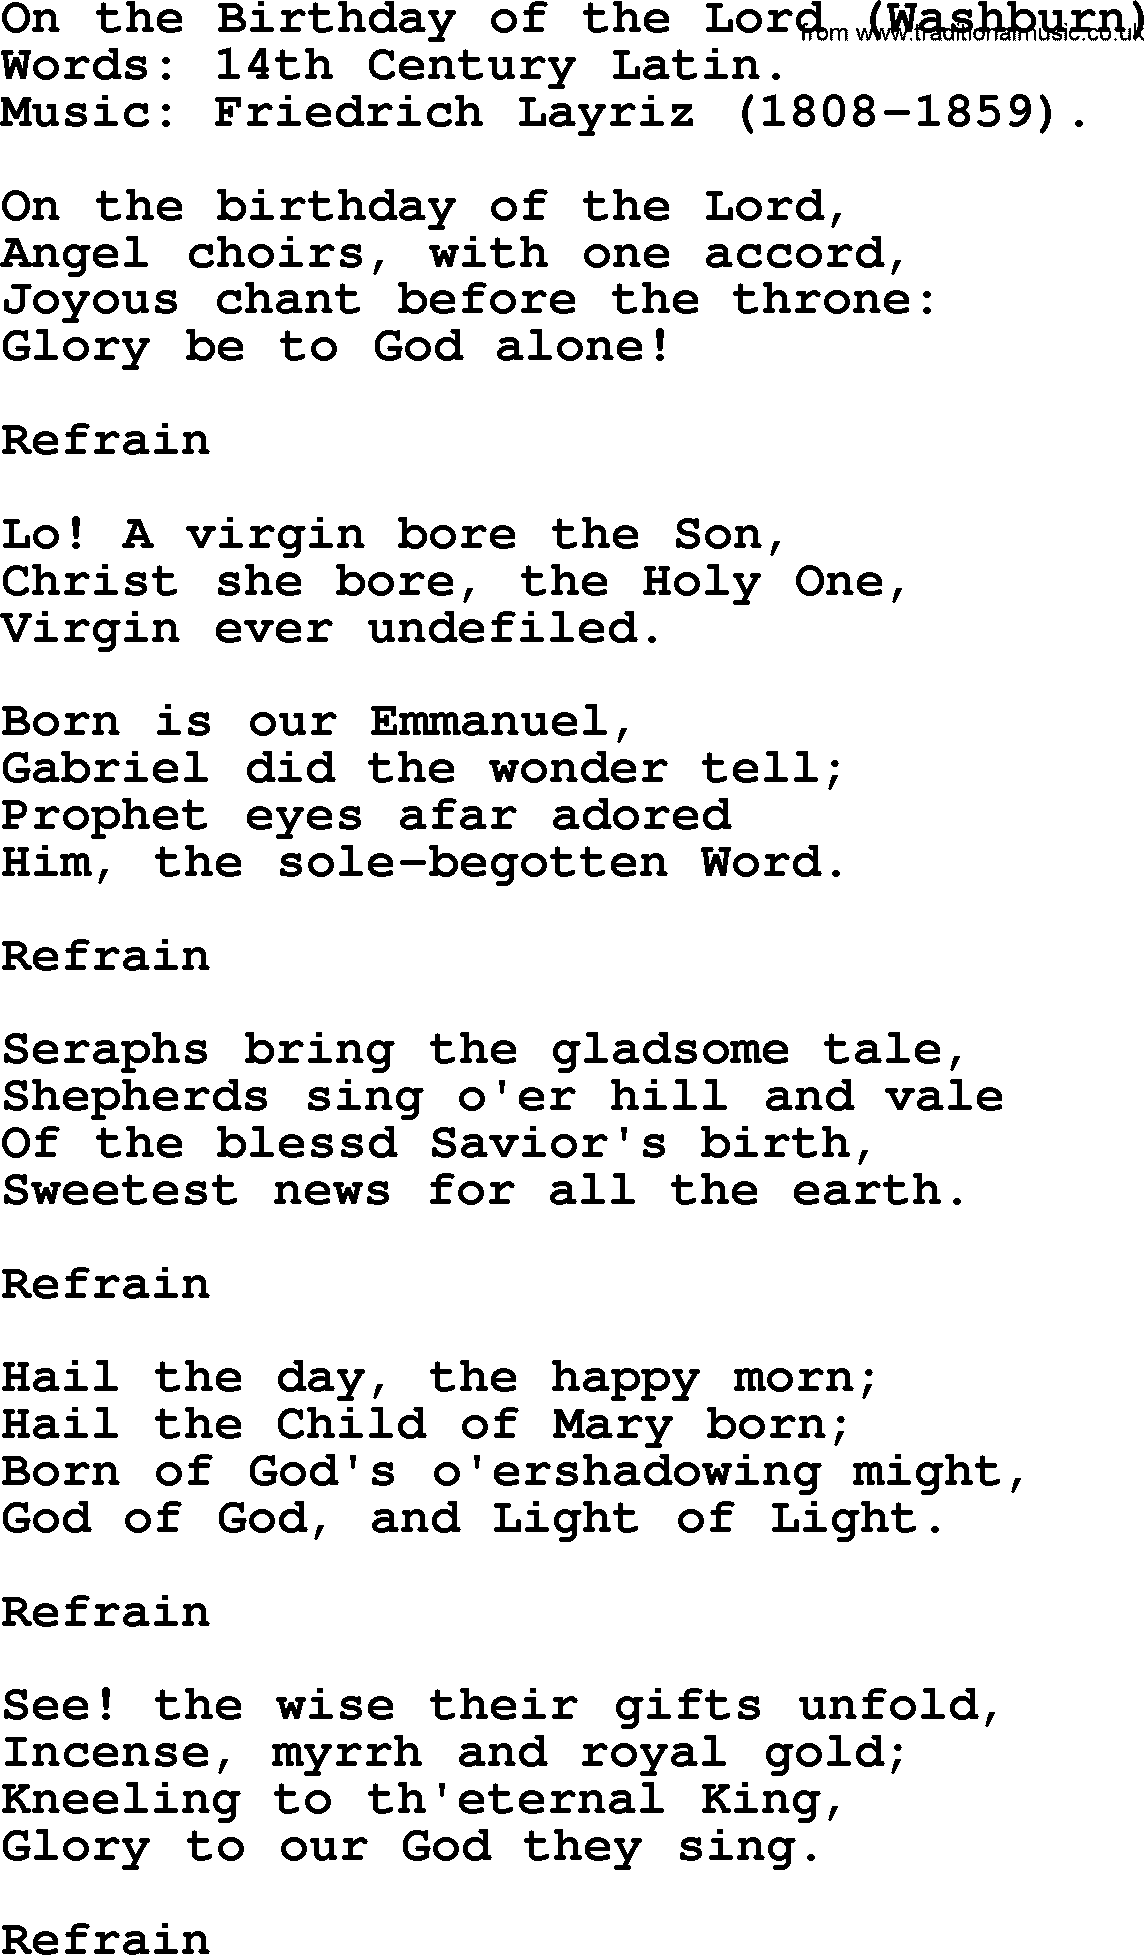 Christmas Hymns, Carols and Songs, title: On The Birthday Of The Lord (washburn), lyrics with PDF